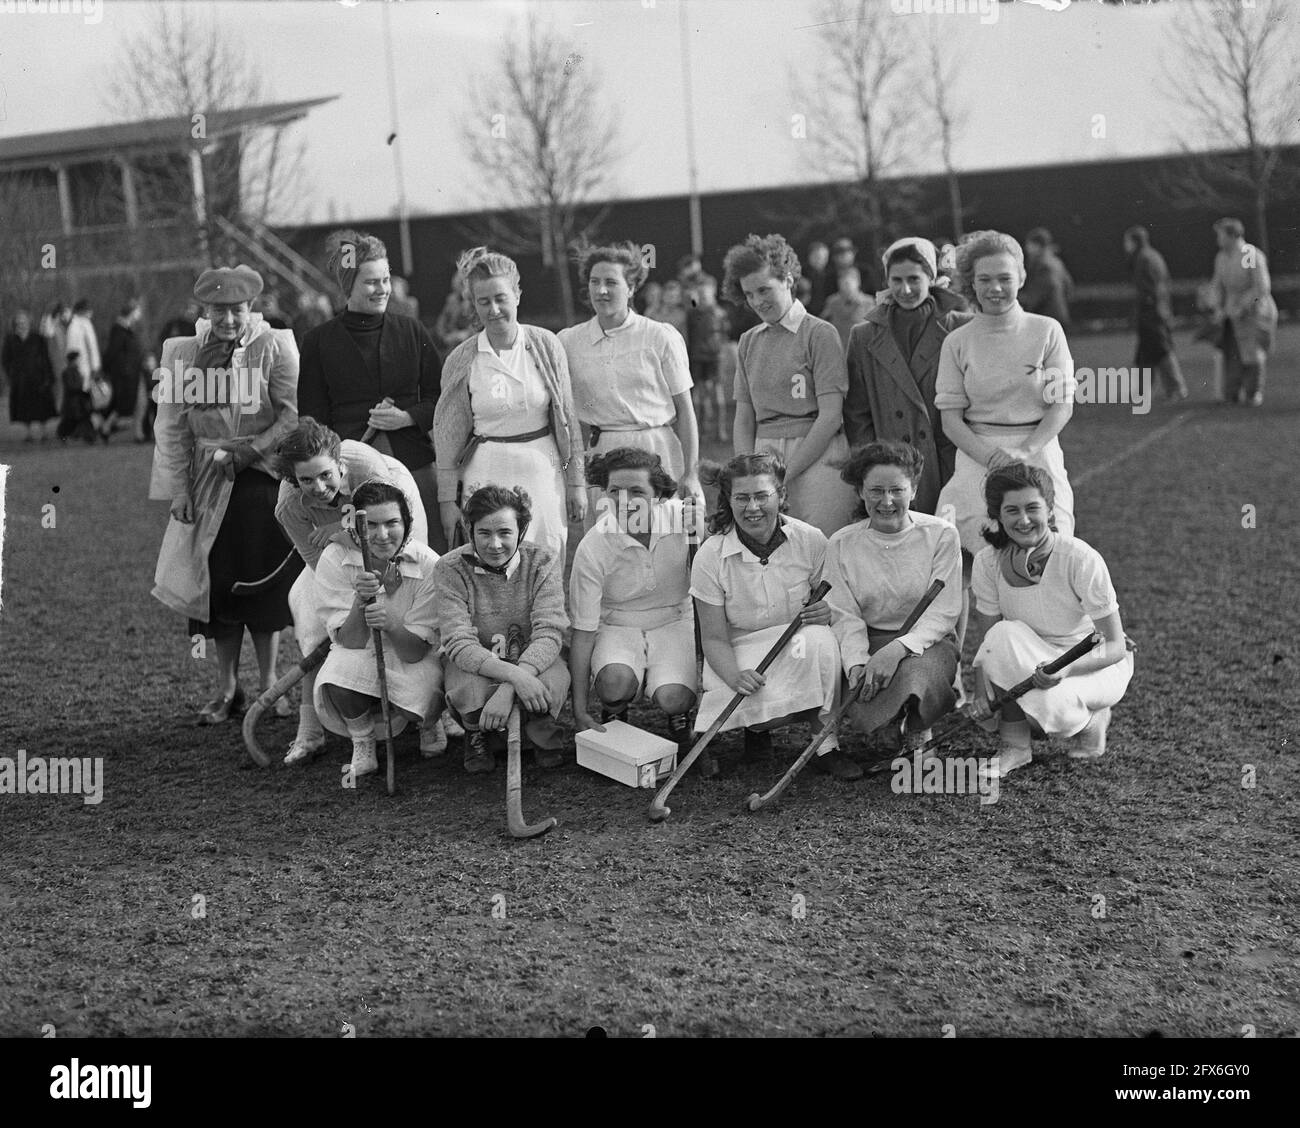 Hockey ladies team, March 16, 1949, field hockey, The Netherlands, 20th century press agency photo, news to remember, documentary, historic photography 1945-1990, visual stories, human history of the Twentieth Century, capturing moments in time Stock Photo